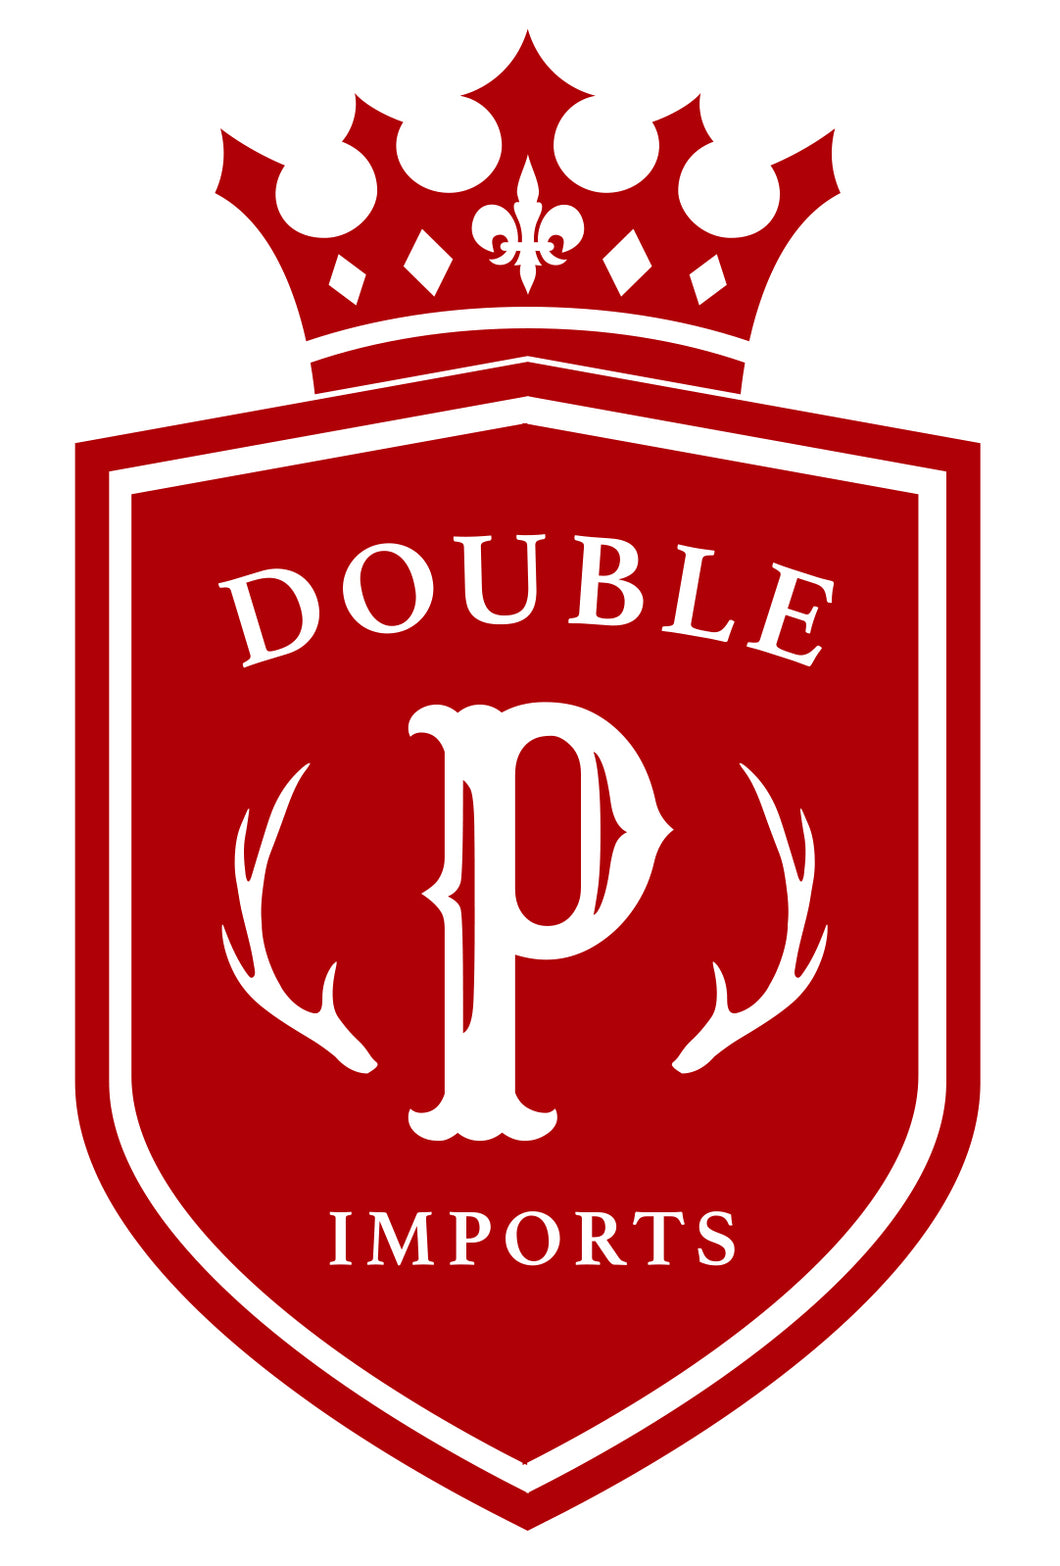 Double P Imports Gift Card